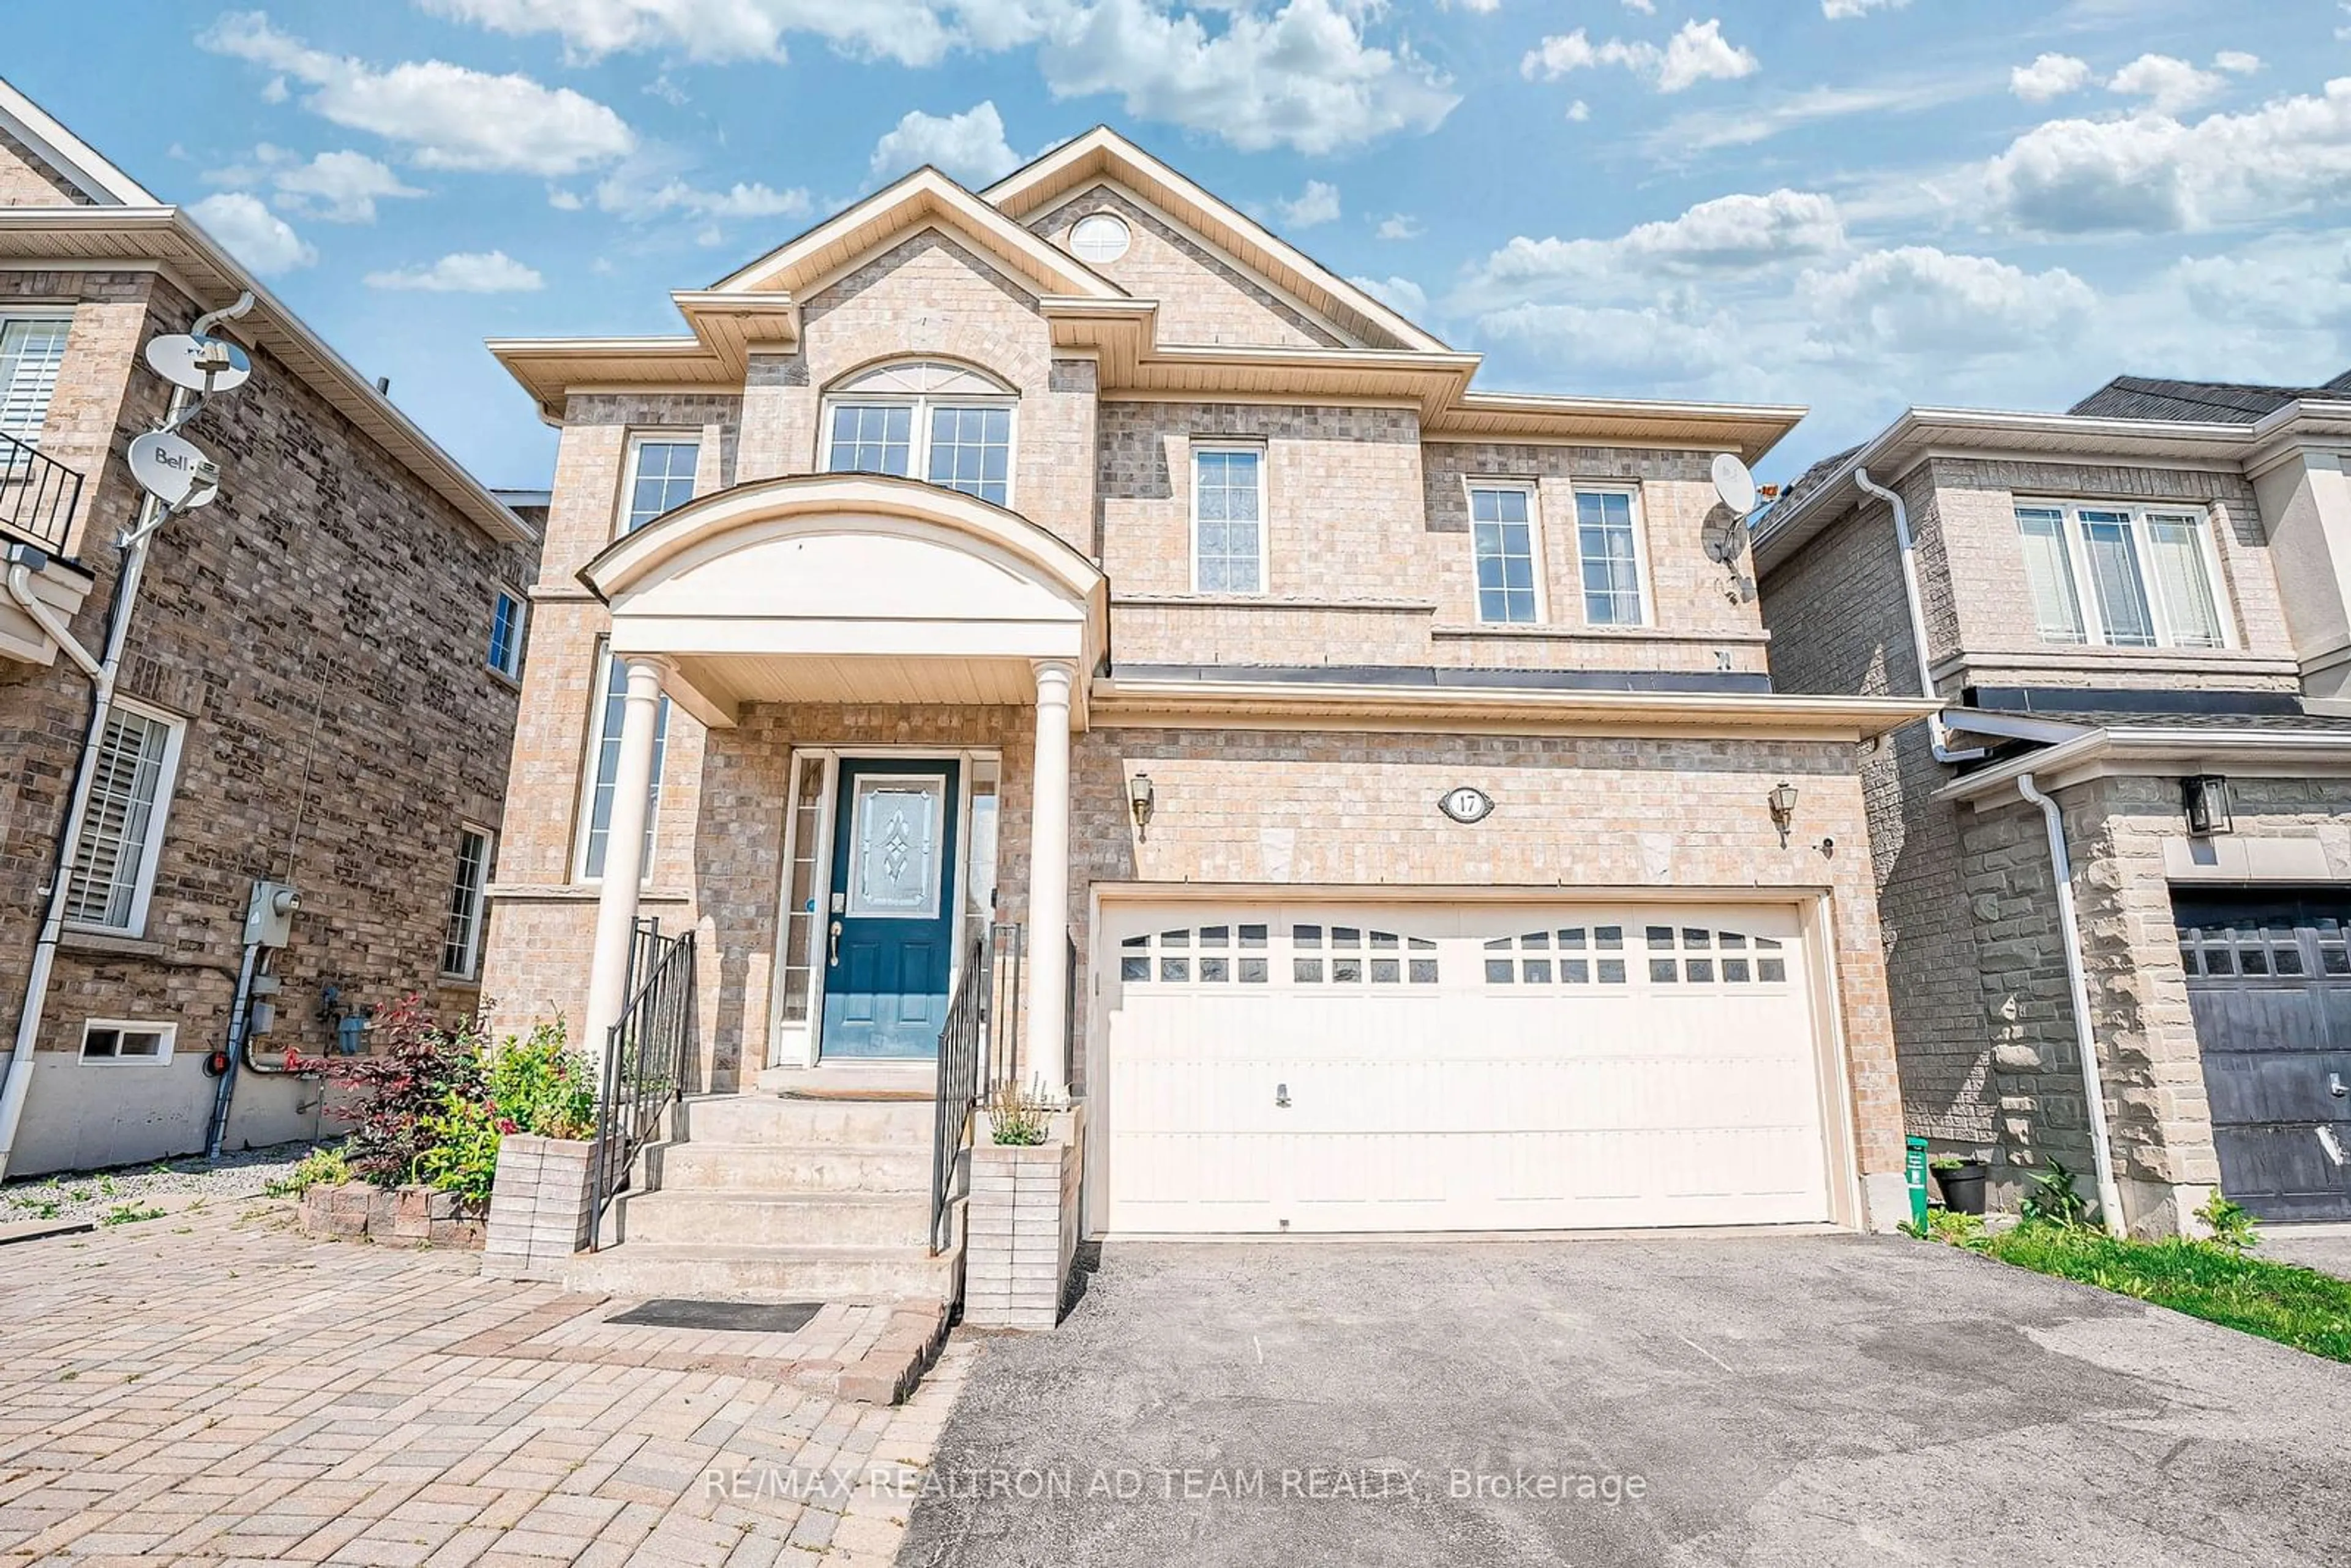 Home with brick exterior material for 47 Rushworth Dr, Ajax Ontario L1Z 0A7